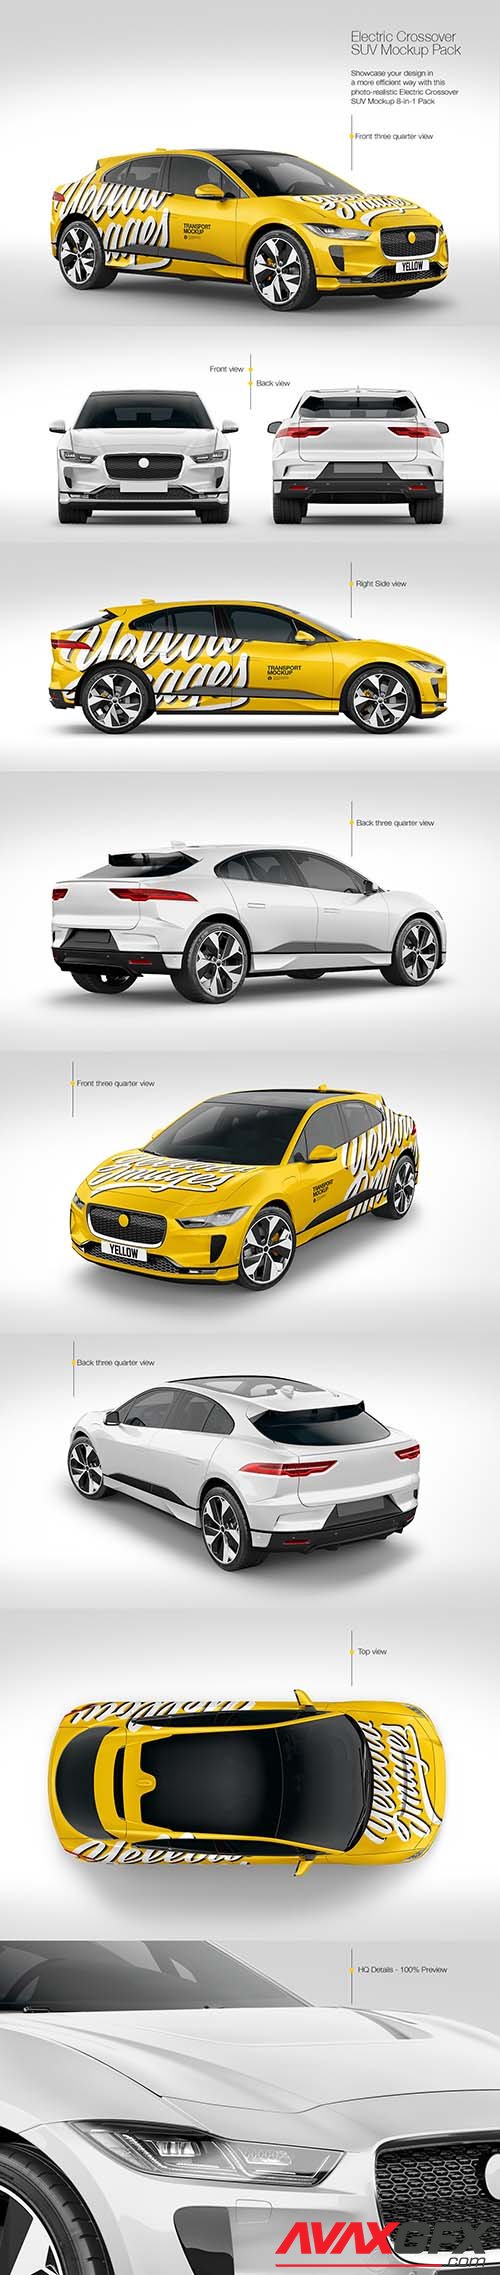 Electric Crossover SUV Mockup Pack 76087